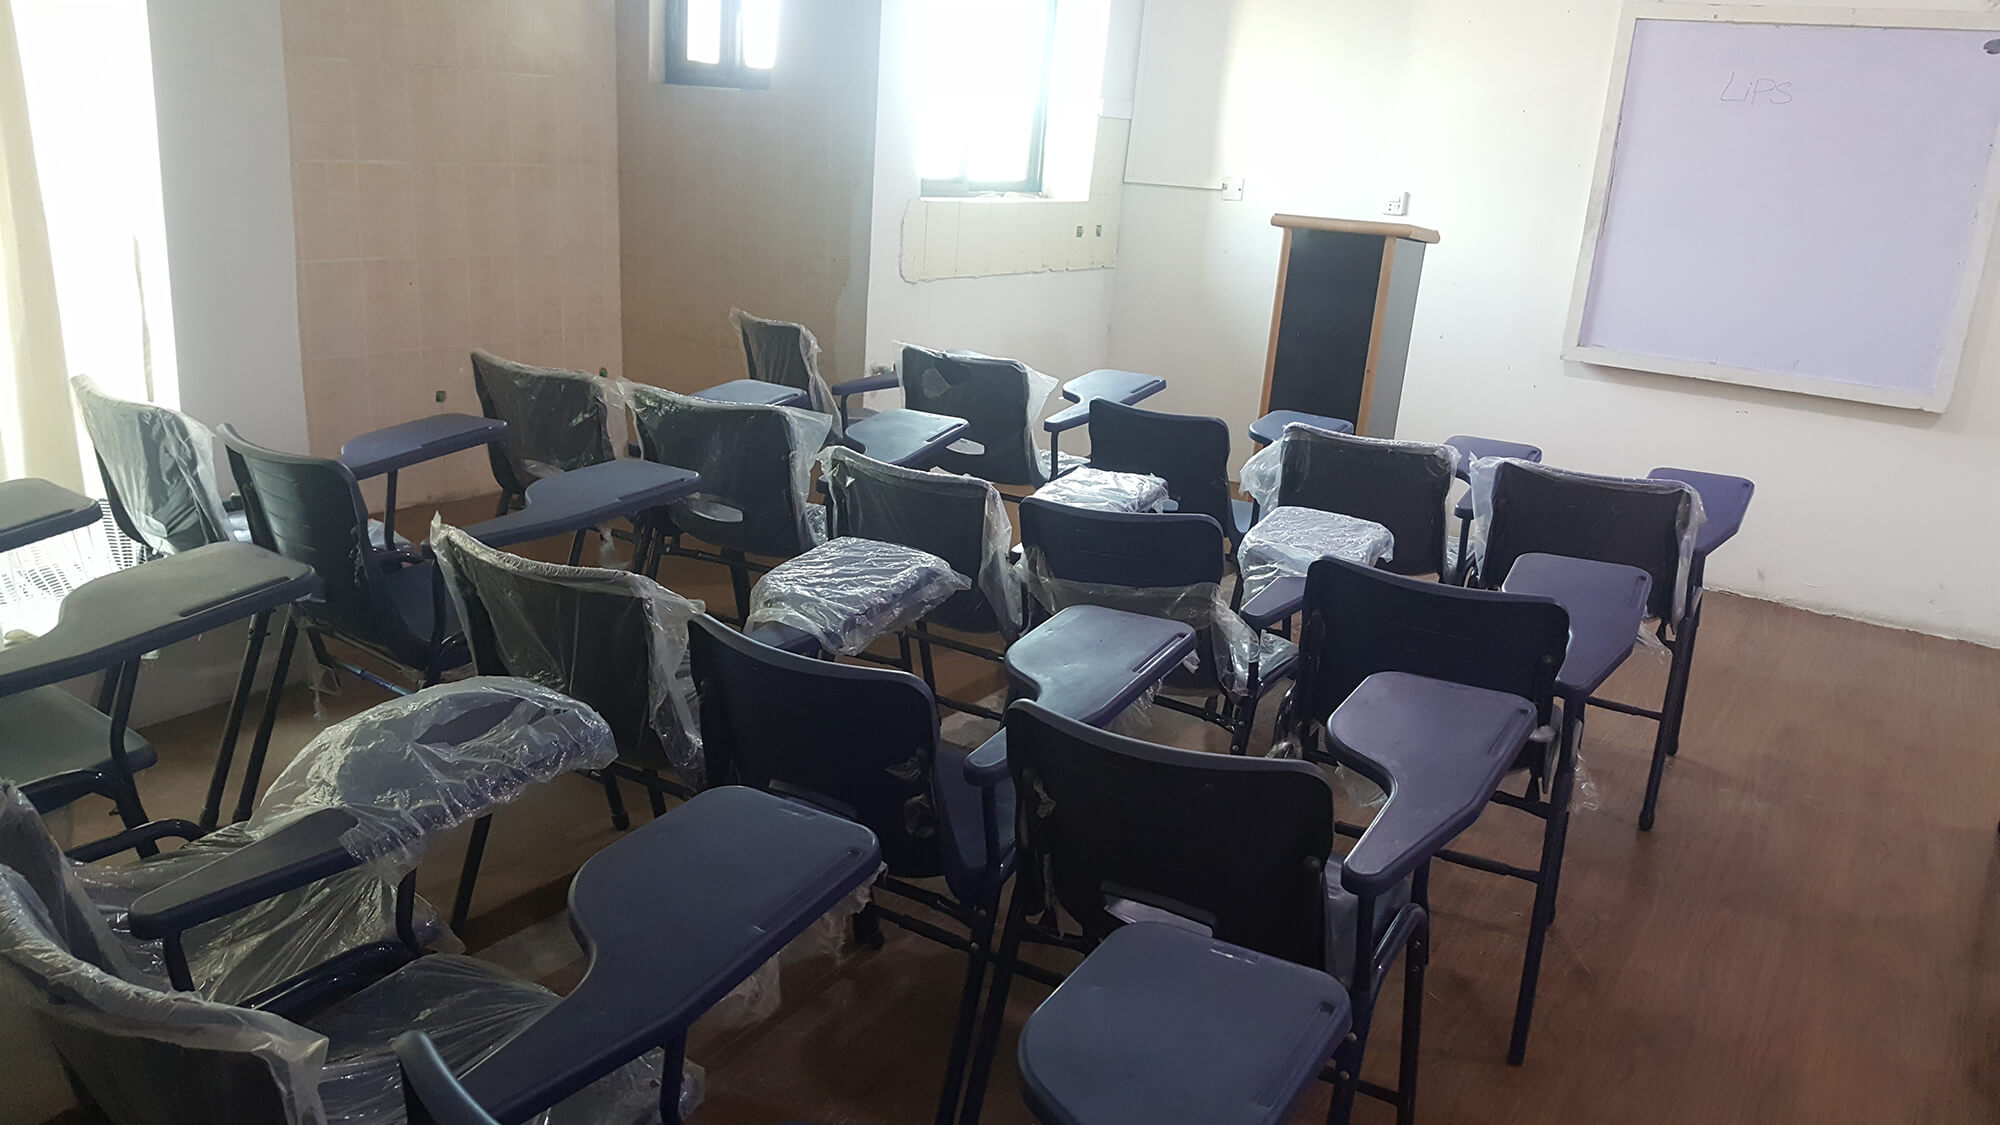 Lecture Halls 7